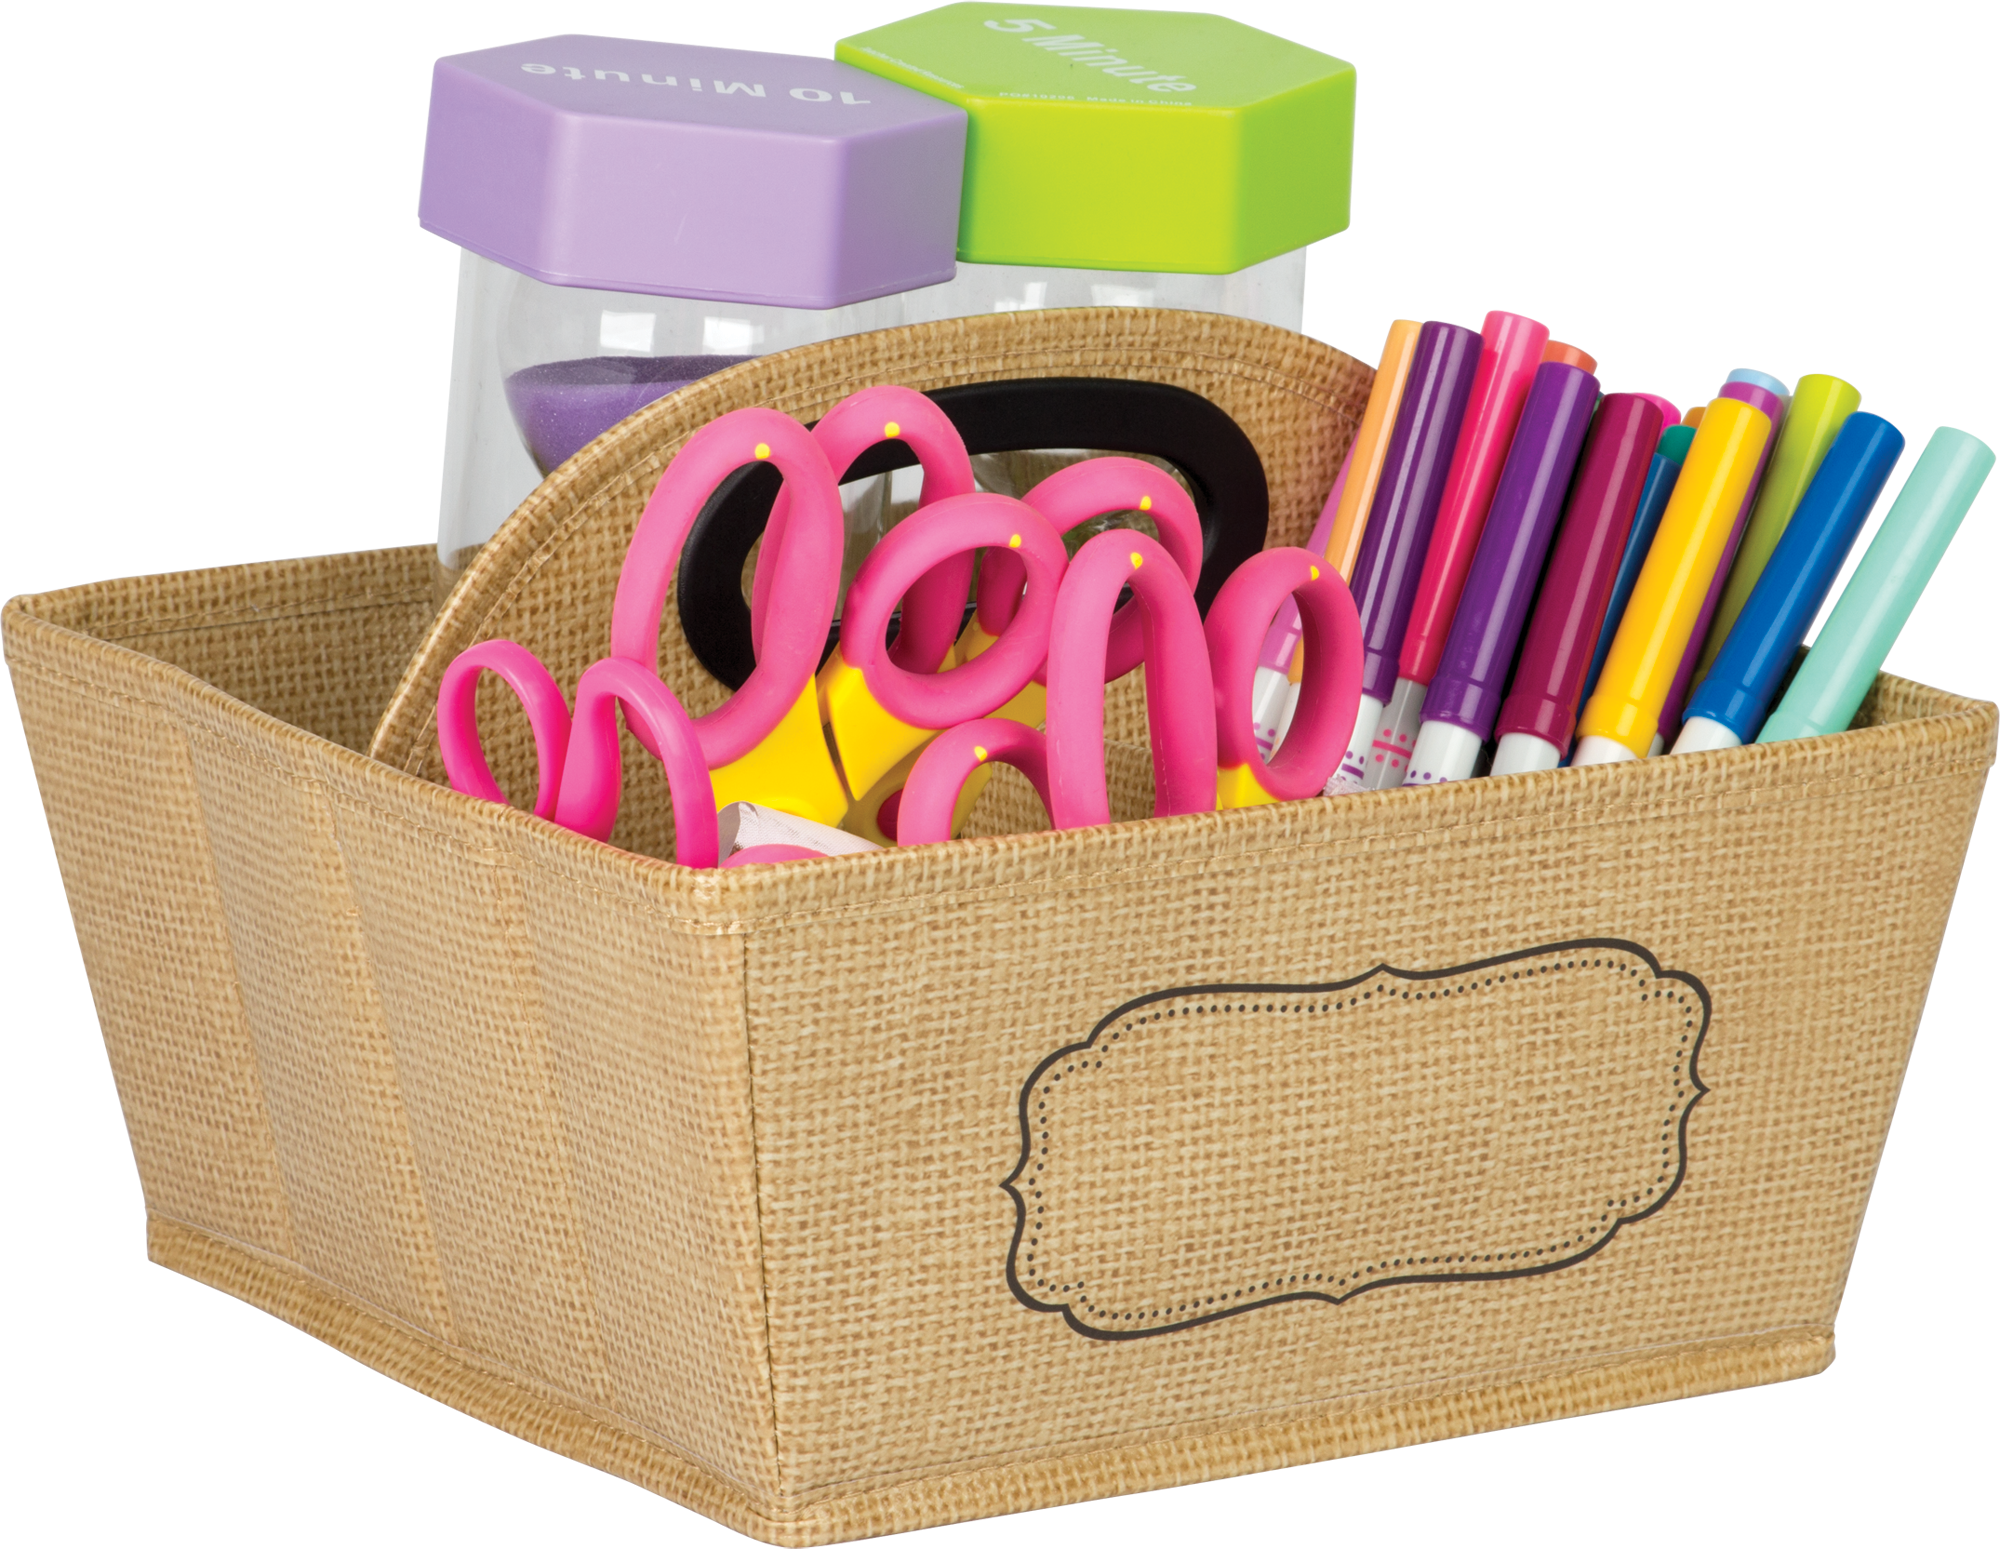 Durable, wipe-down surface. Folds for compact storage!